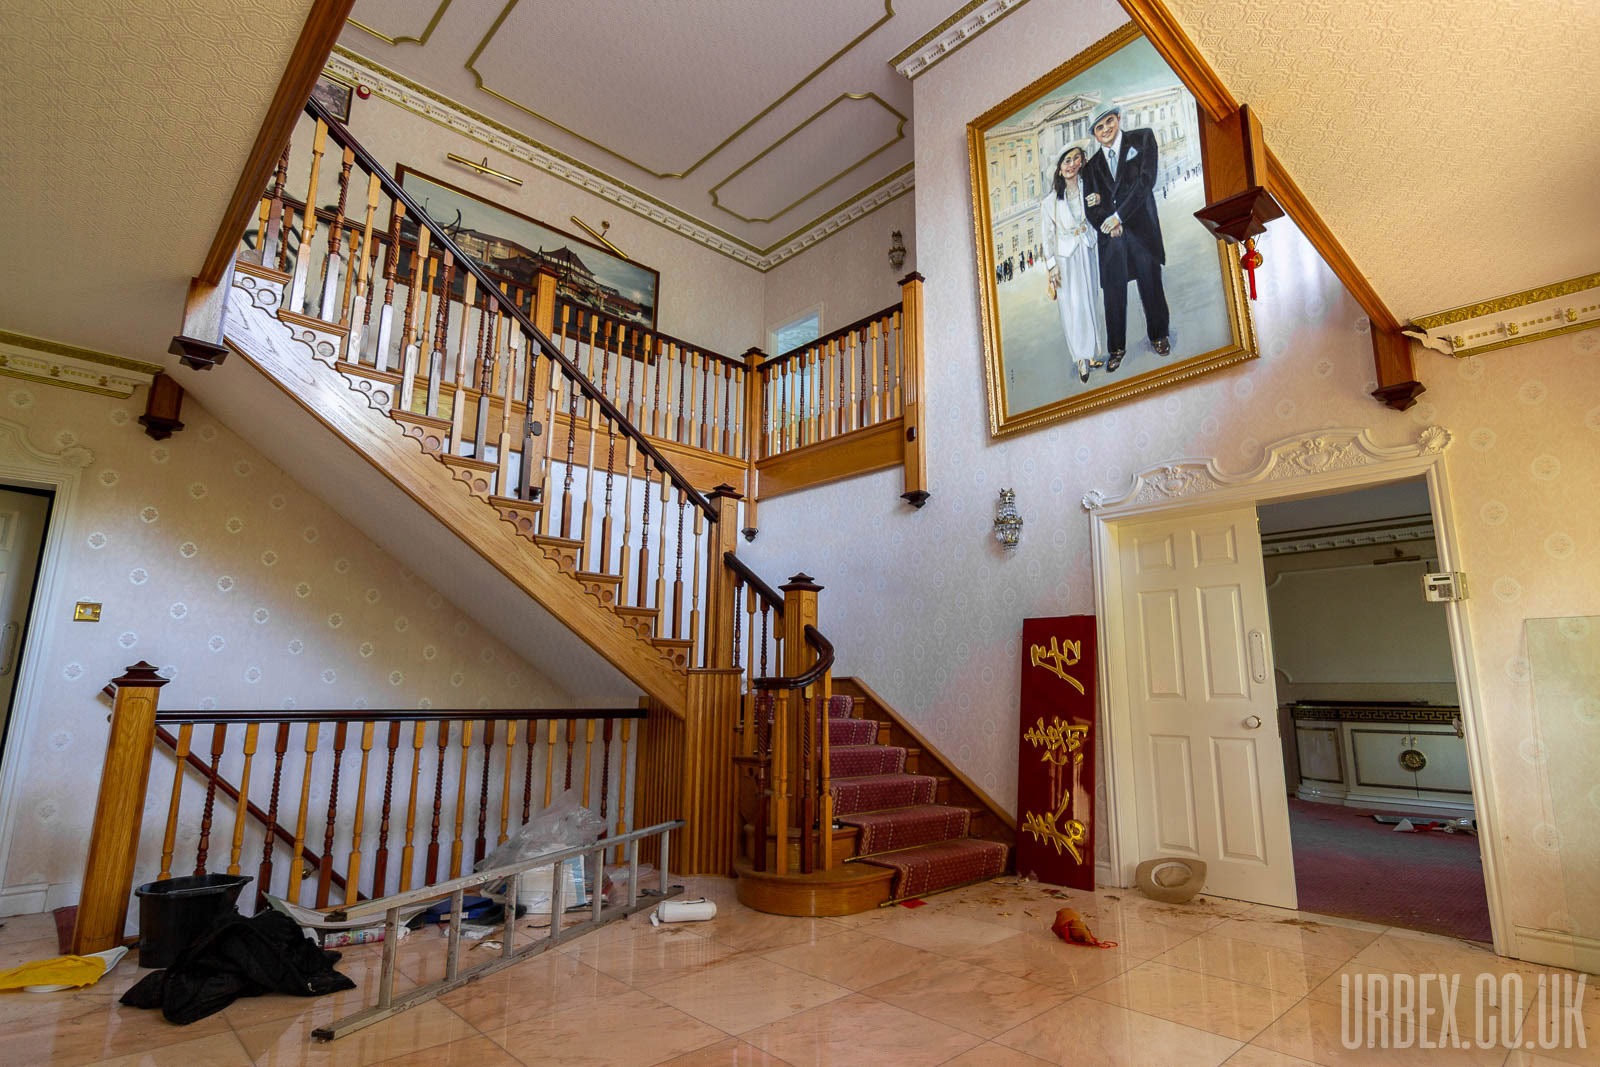 The Entrance hall of the abandoned mansion featuring a big painting of Jason Tsai